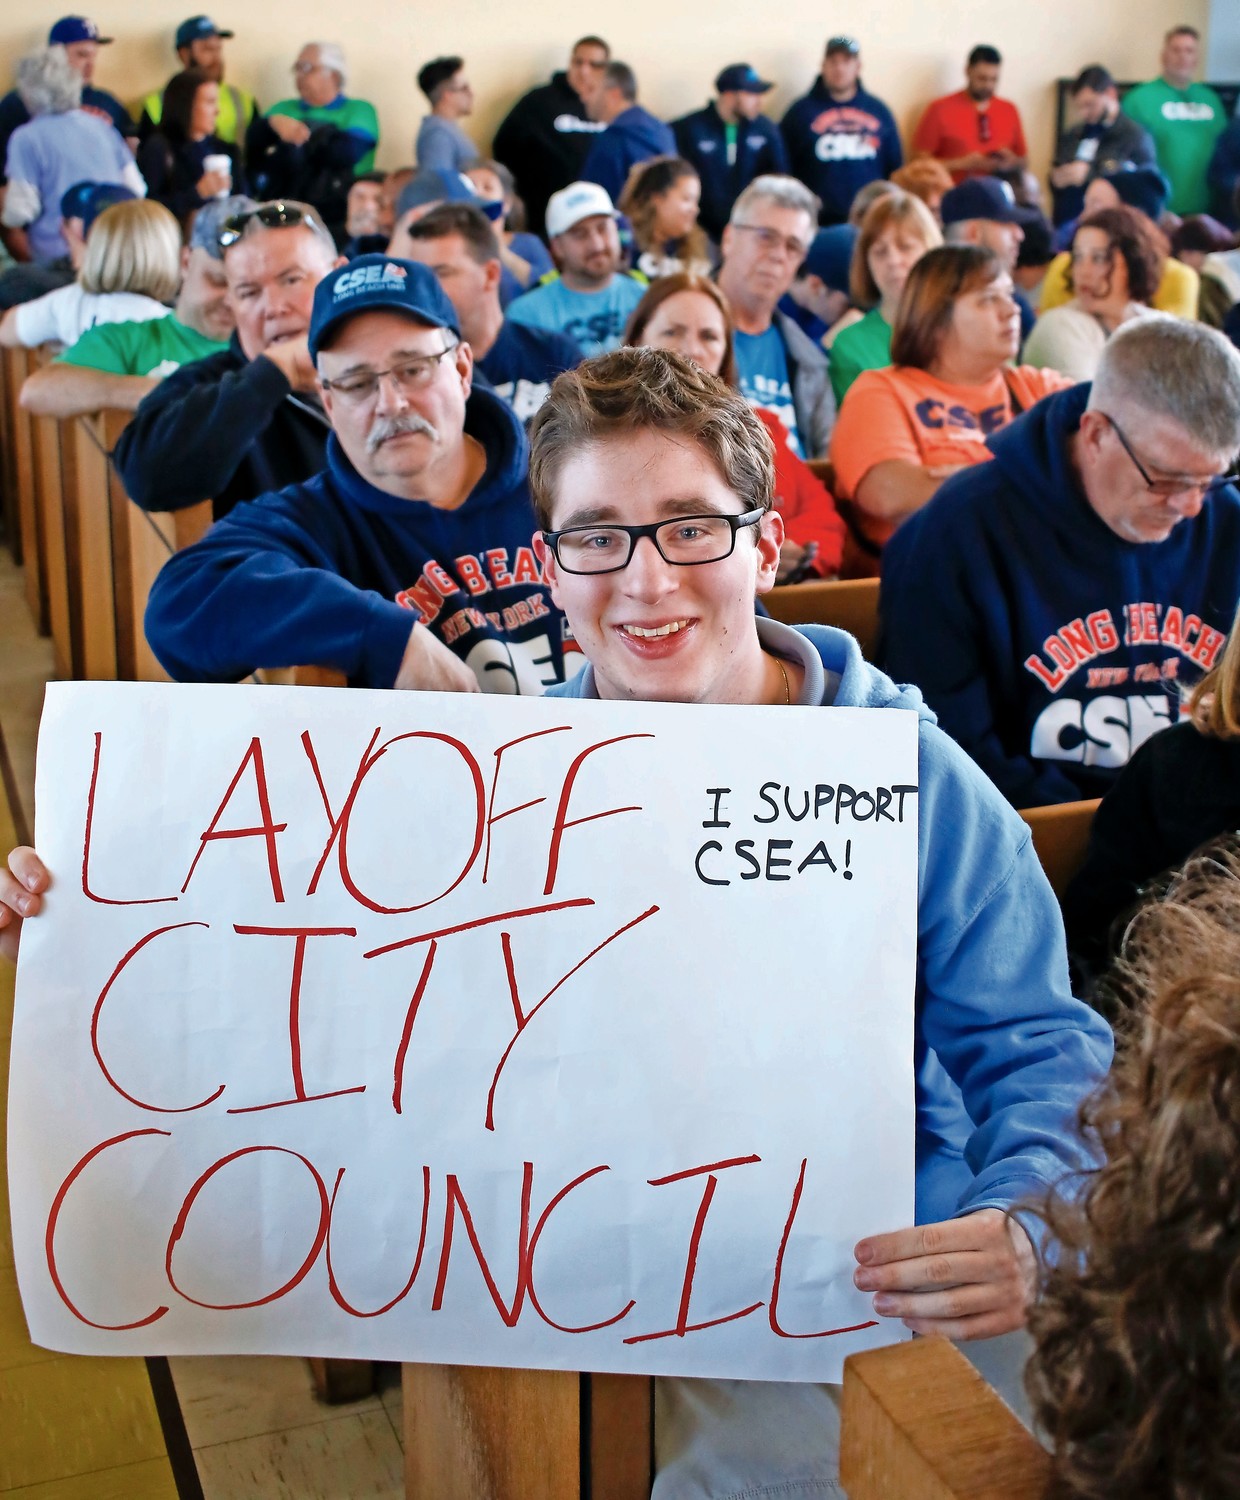 Eddie Vrona, a student at Long Beach High School, at the May 1 budget hearing, where he opposed CSEA layoffs.